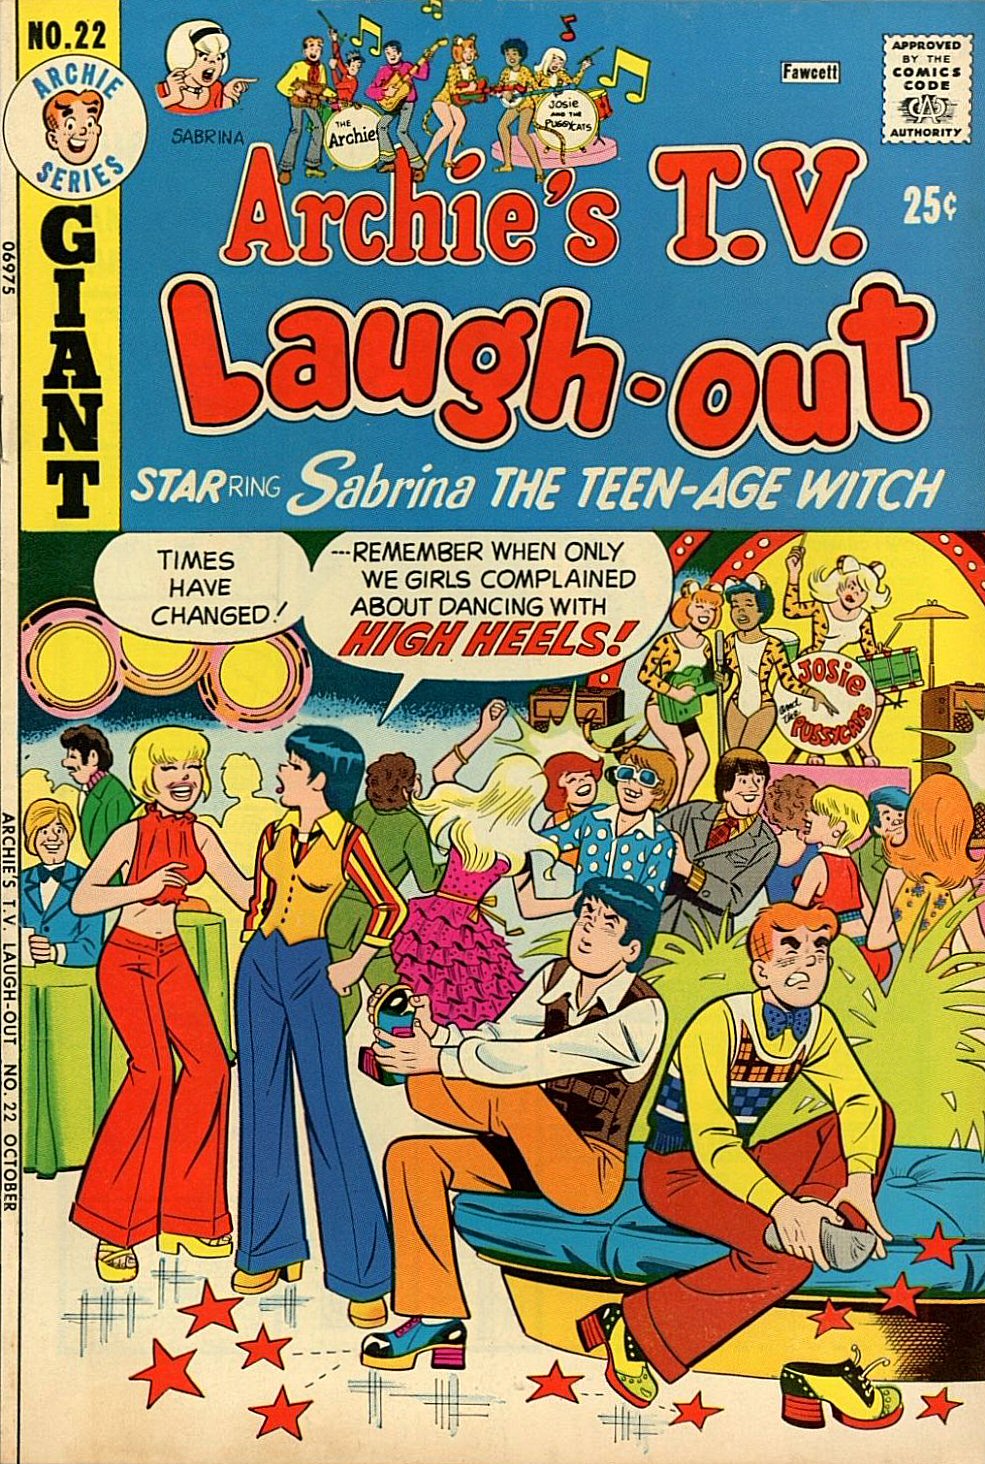 Read online Archie's TV Laugh-Out comic -  Issue #22 - 1